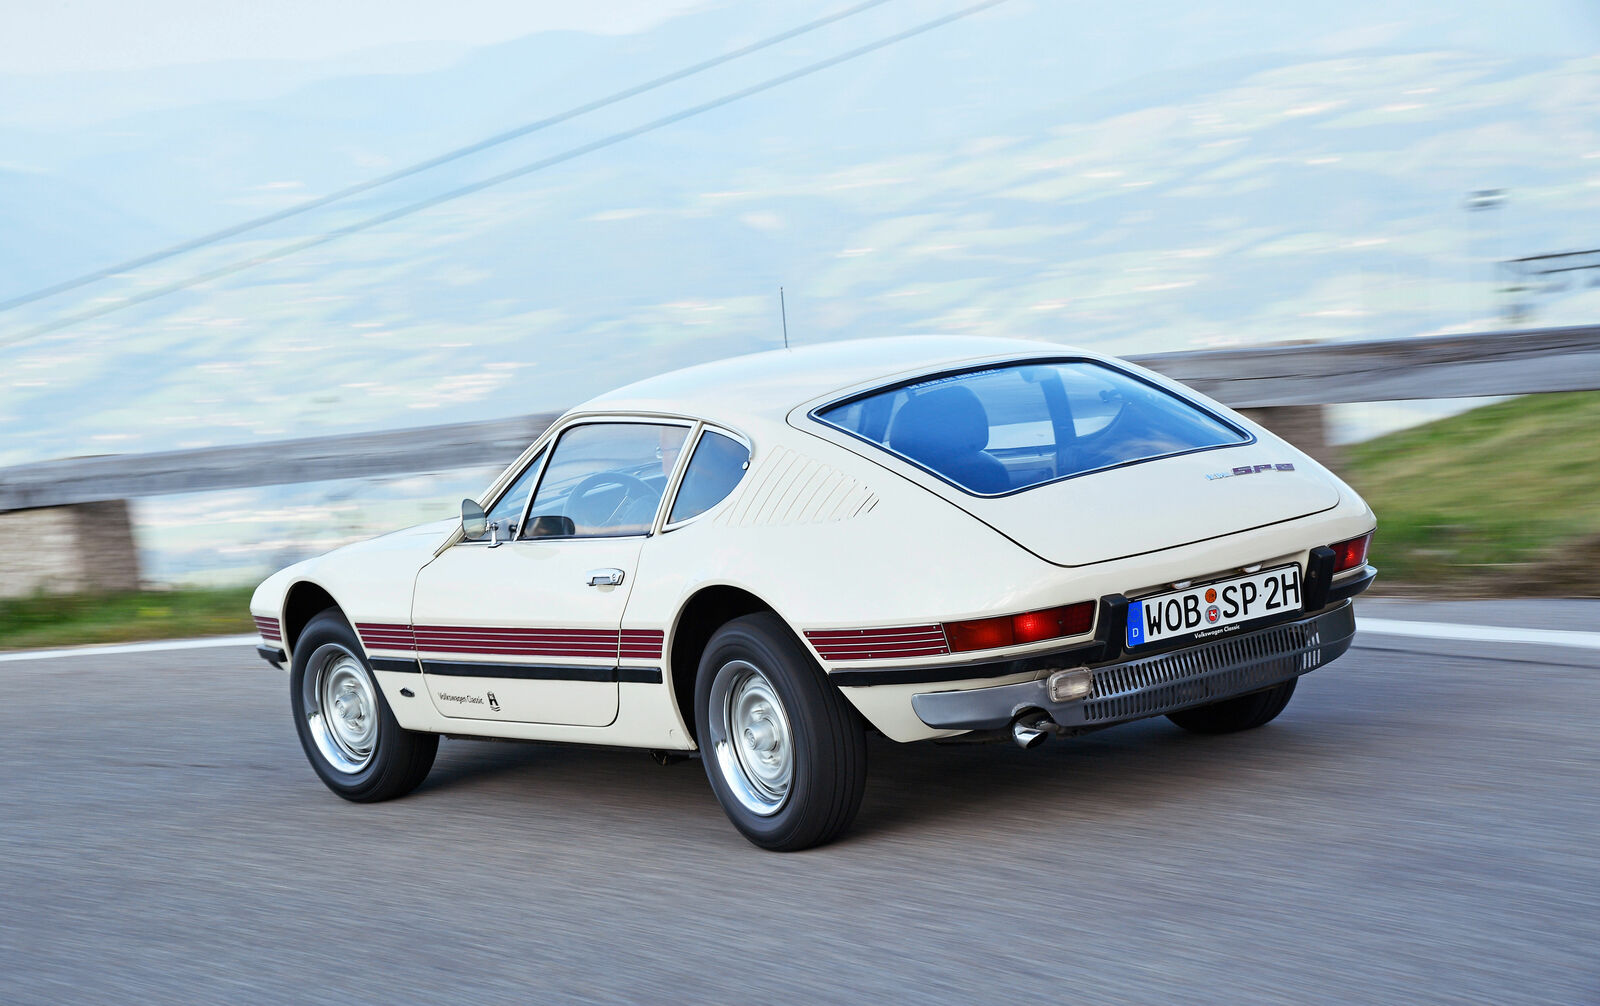 Volkswagen SP 2 (1974): The sporty coupe with a rear engine, named after its production site near São Paulo, was built exclusively for the Brazilian market.